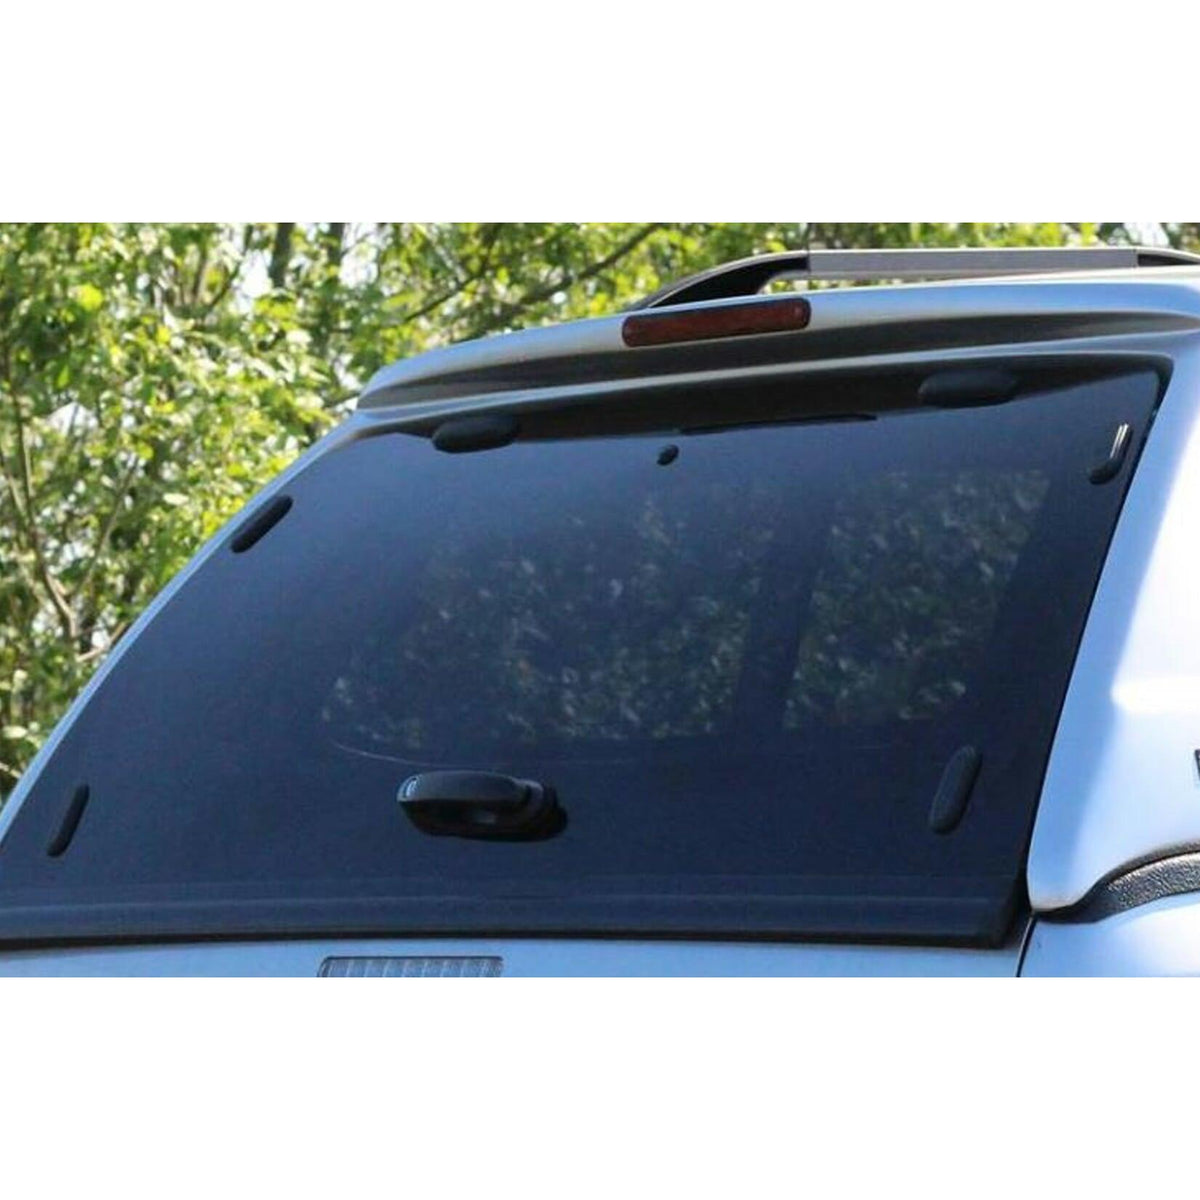 RIDGEBACK REPLACEMENT REAR GLASS L/S-SERIES HARDTOP – MITSUBISHI L200 SERIES 5/6 DOUBLE CAB 2015 ON - Storm Xccessories2